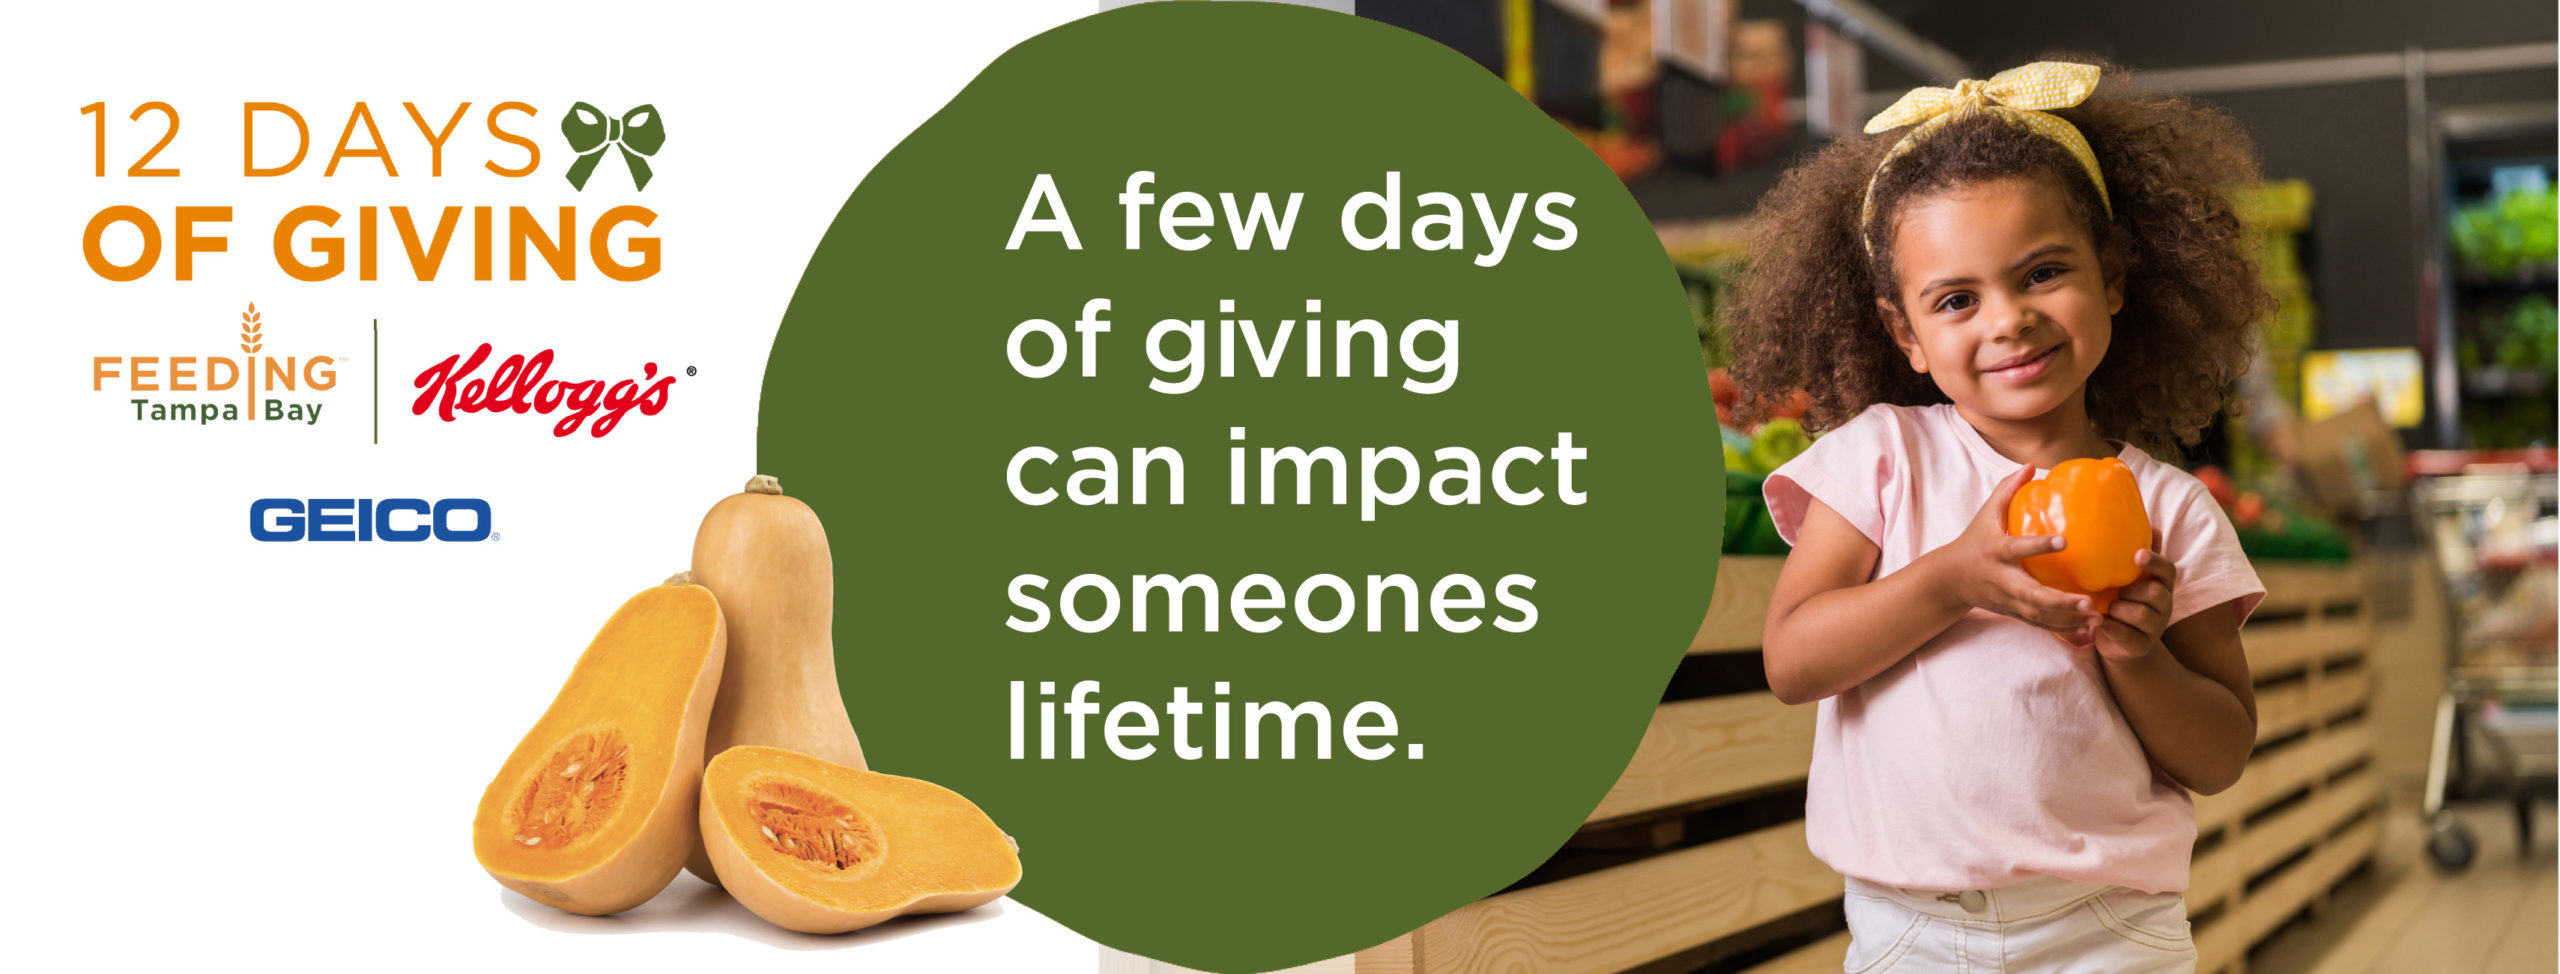 Little girl smiles while holding an orange pepper for 12 days of giving campaign graphic